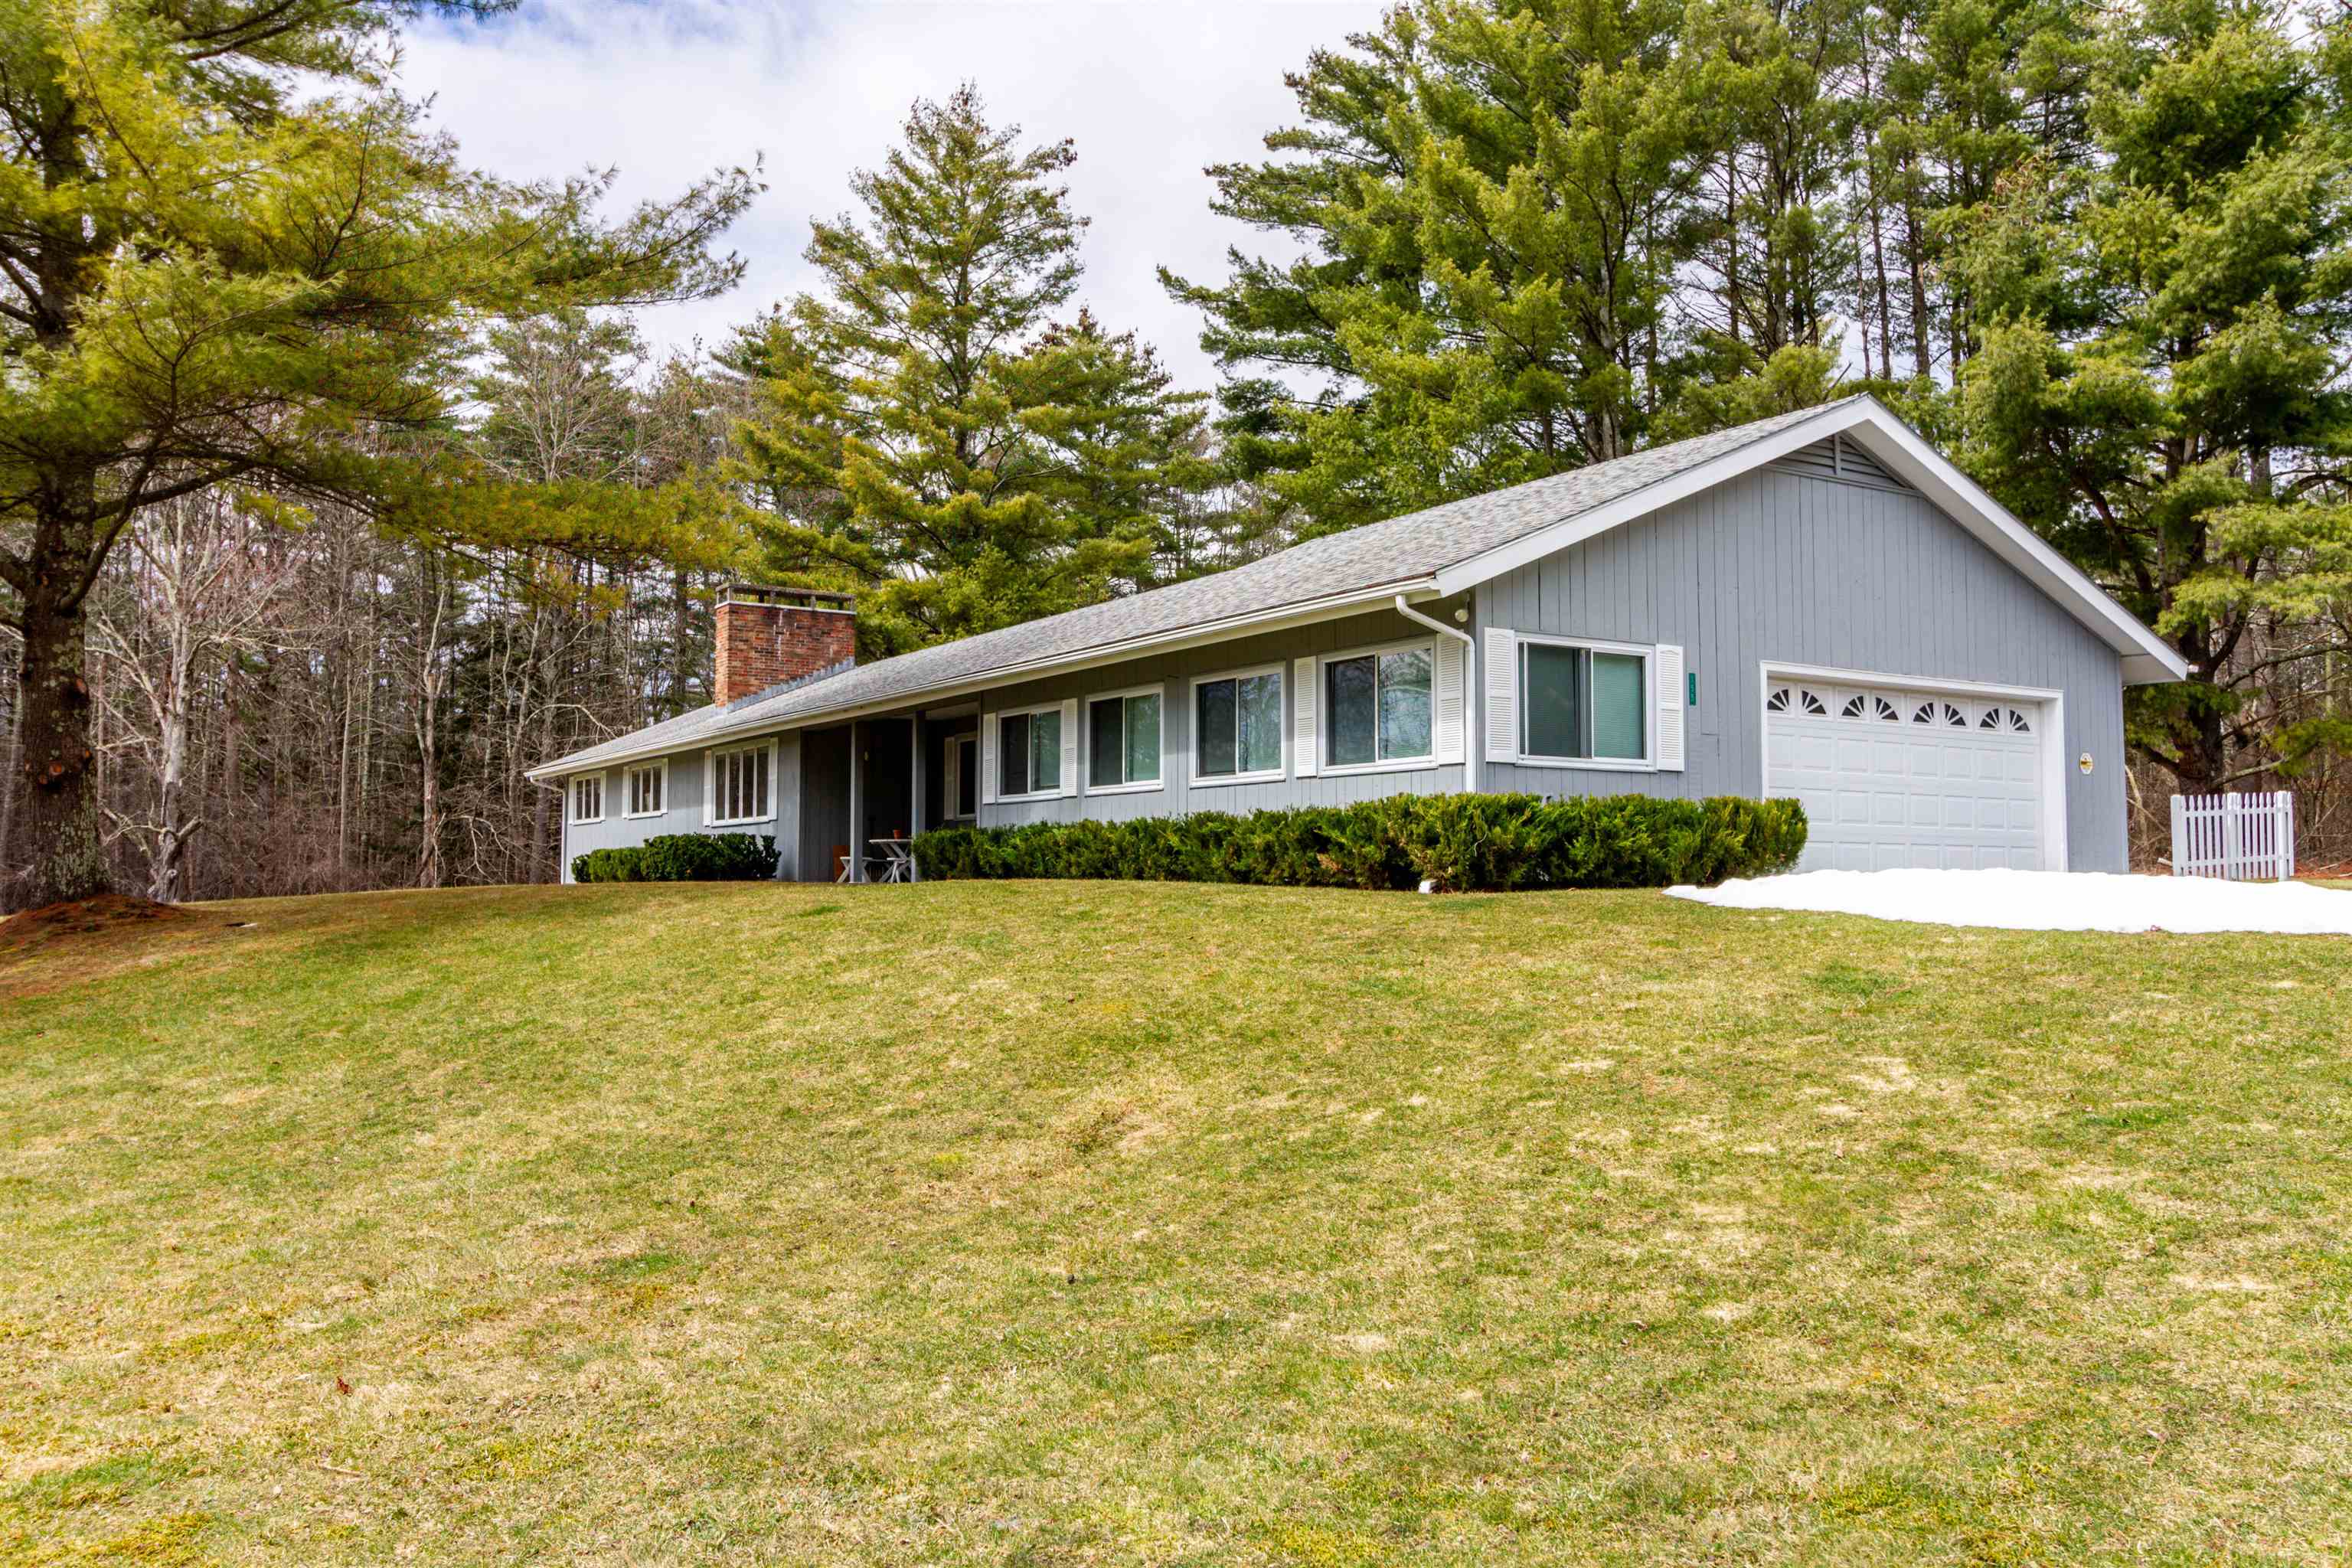 WALLINGFORD VT Homes for sale